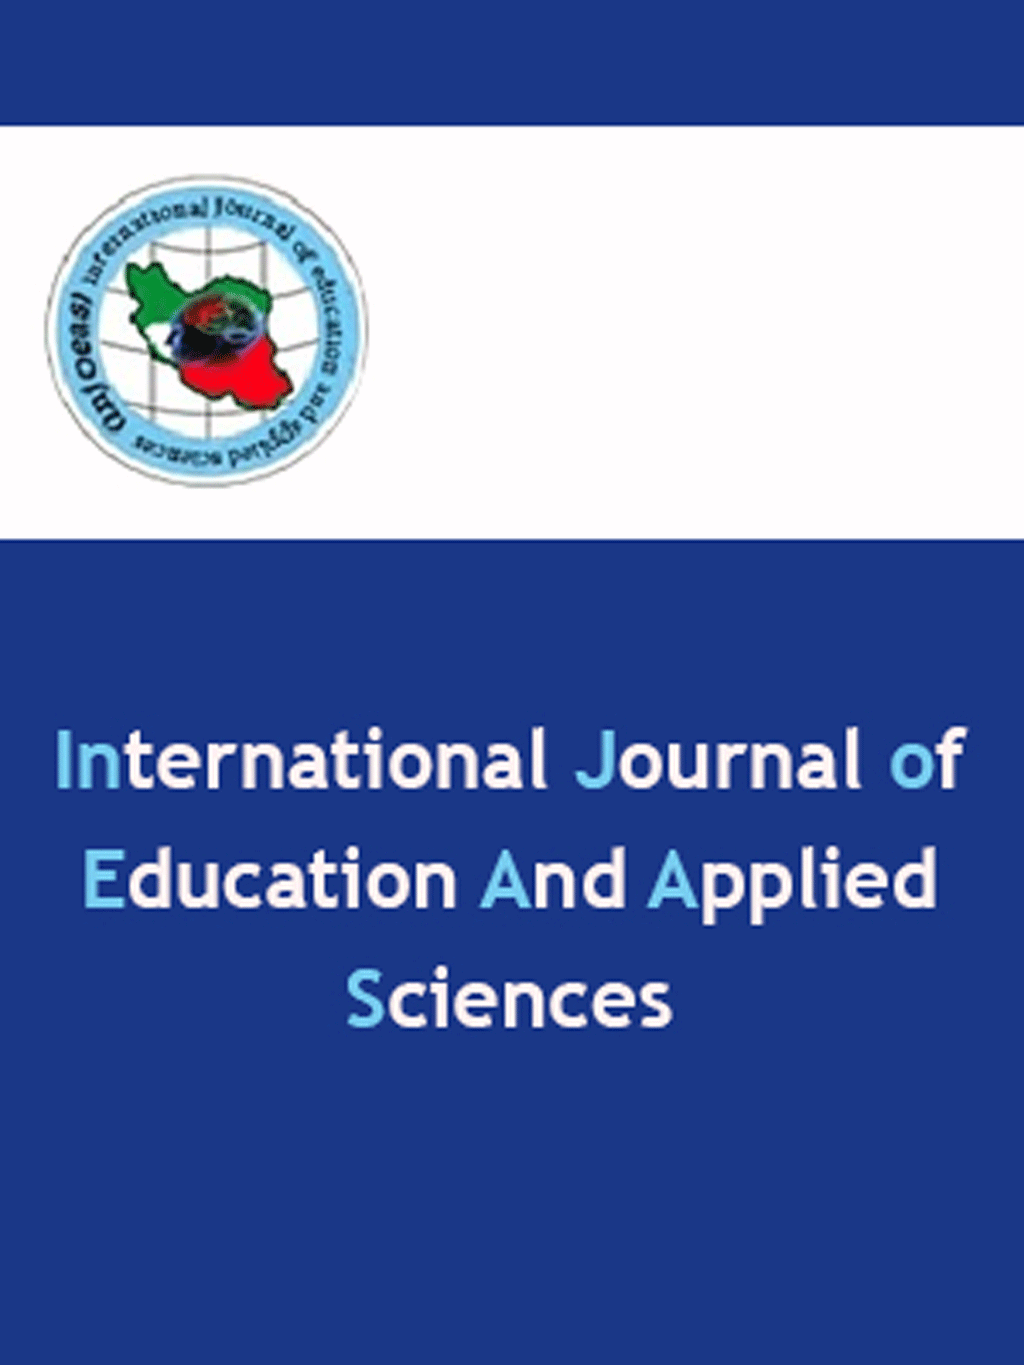 Education and Applied Sciences - January 2022, Volume 2 - Number 4